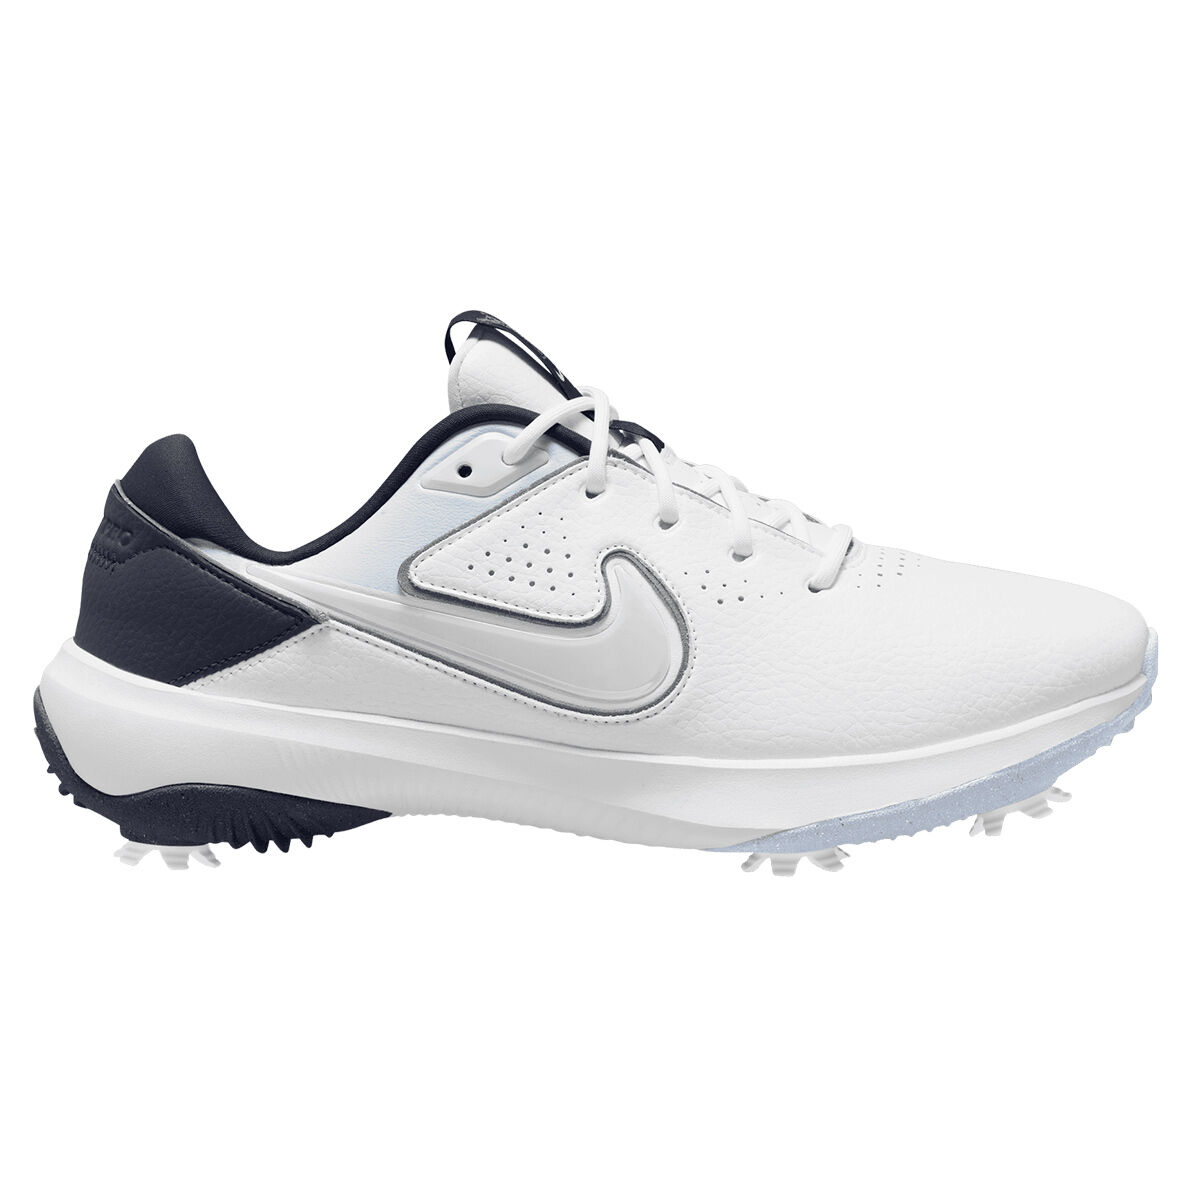 Nike Men's Victory Pro 3 Waterproof Spiked Golf Shoes, Mens, White/football grey/obsidian, 8 | American Golf von Nike Golf